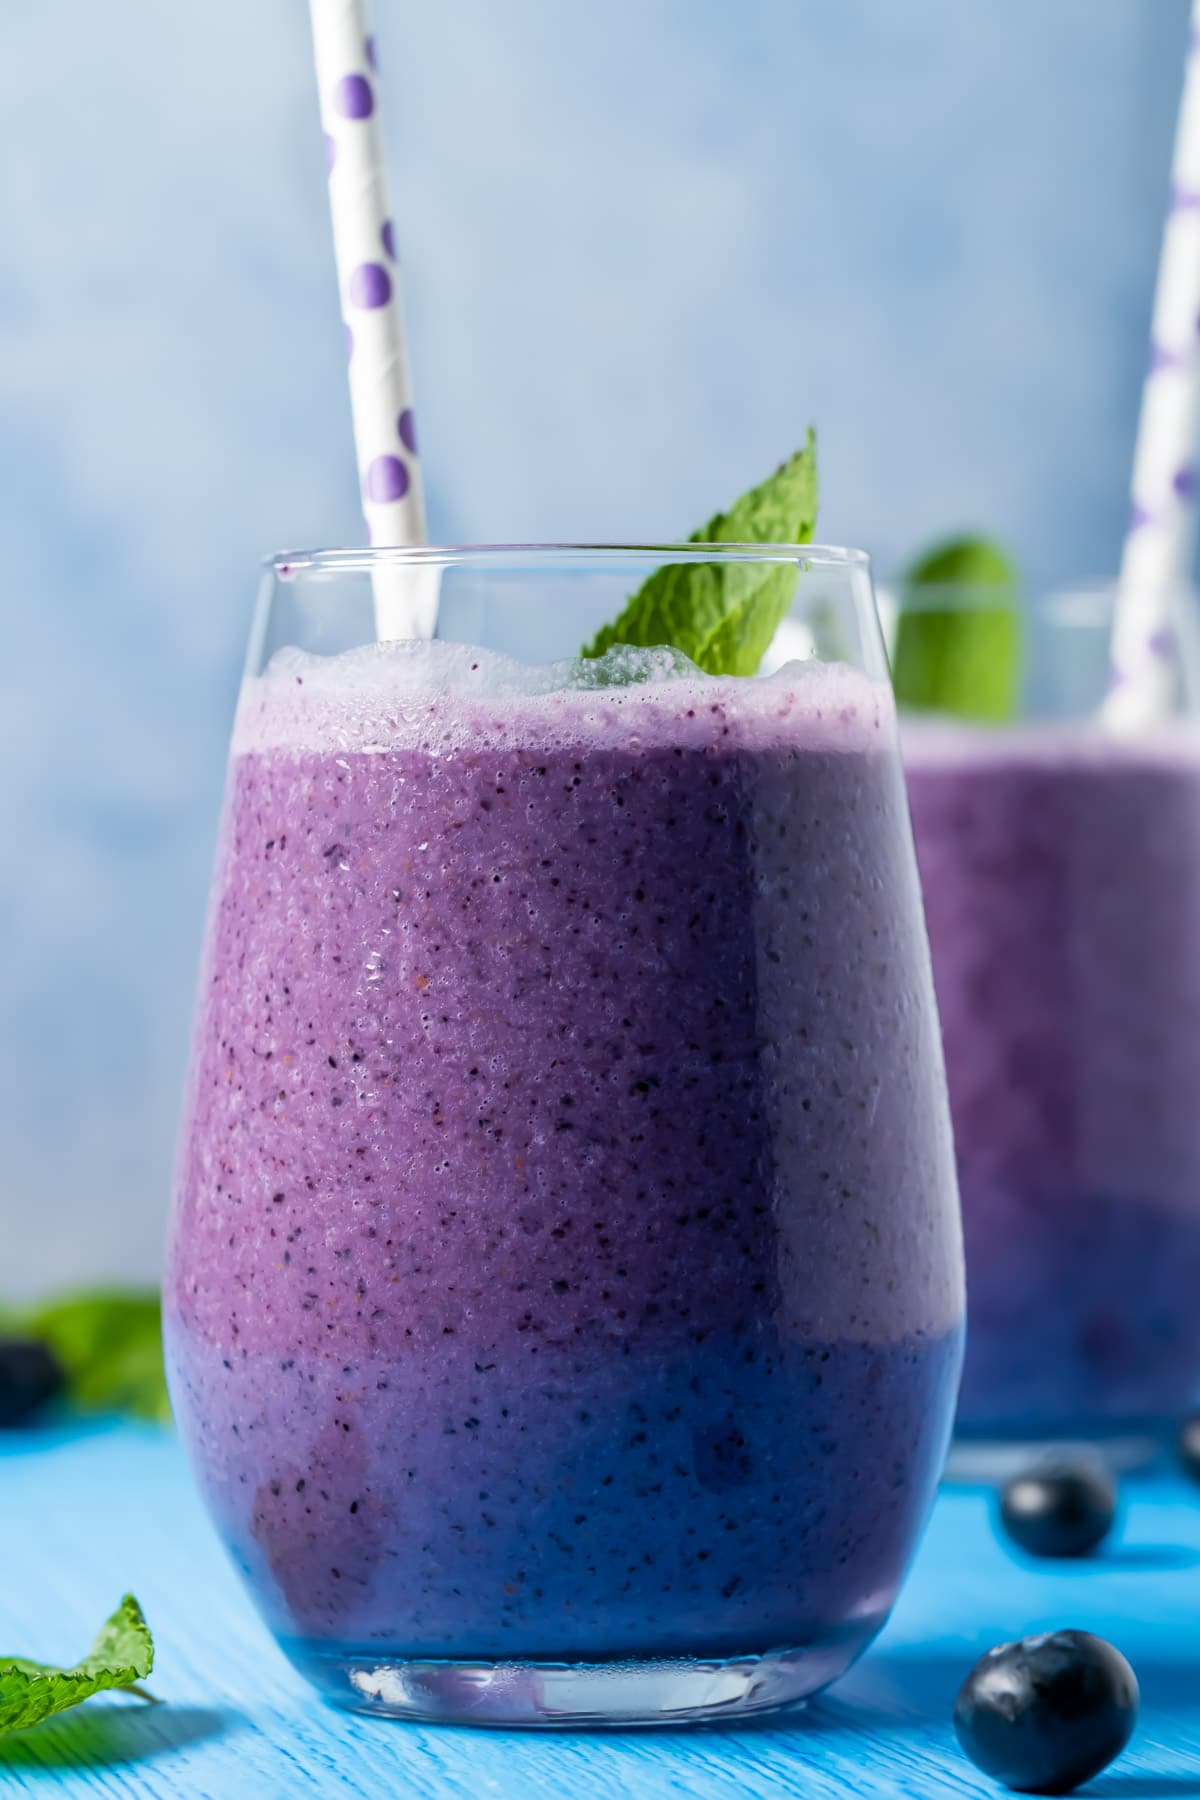 Blueberry smoothies in glasses with straws and fresh mint leaves.